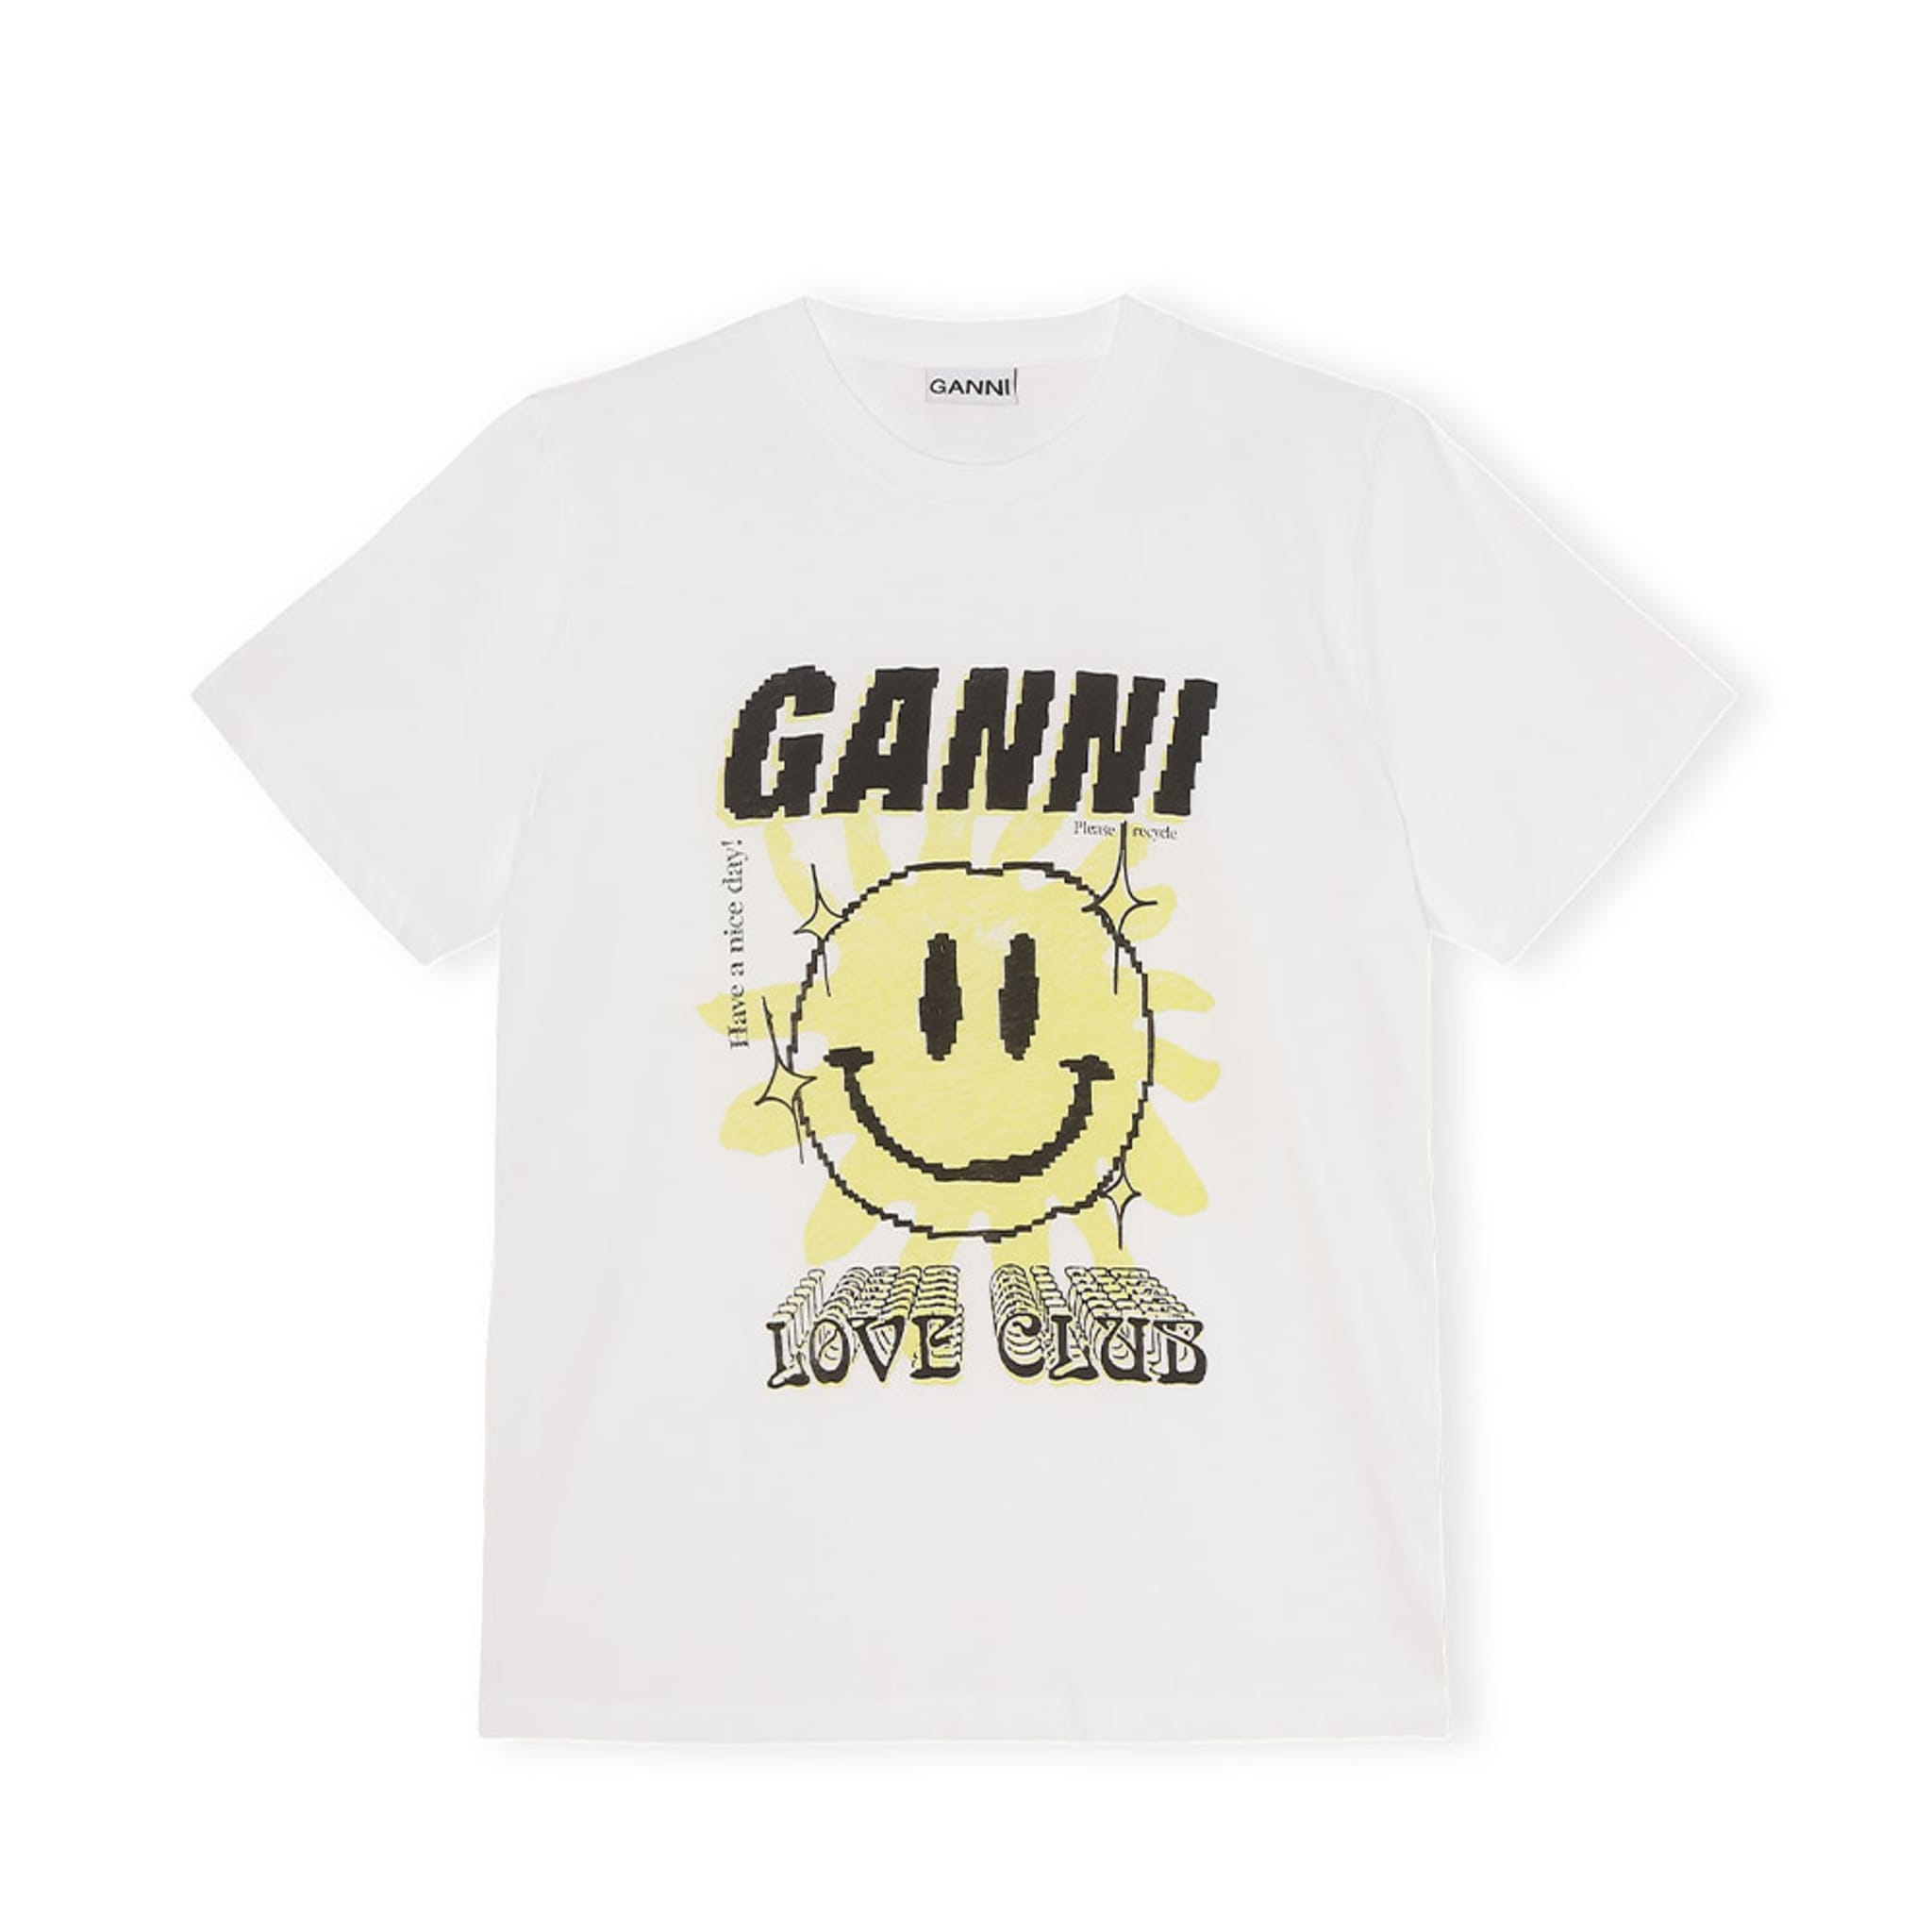 O-neck Relaxed T-shirt, Bright White